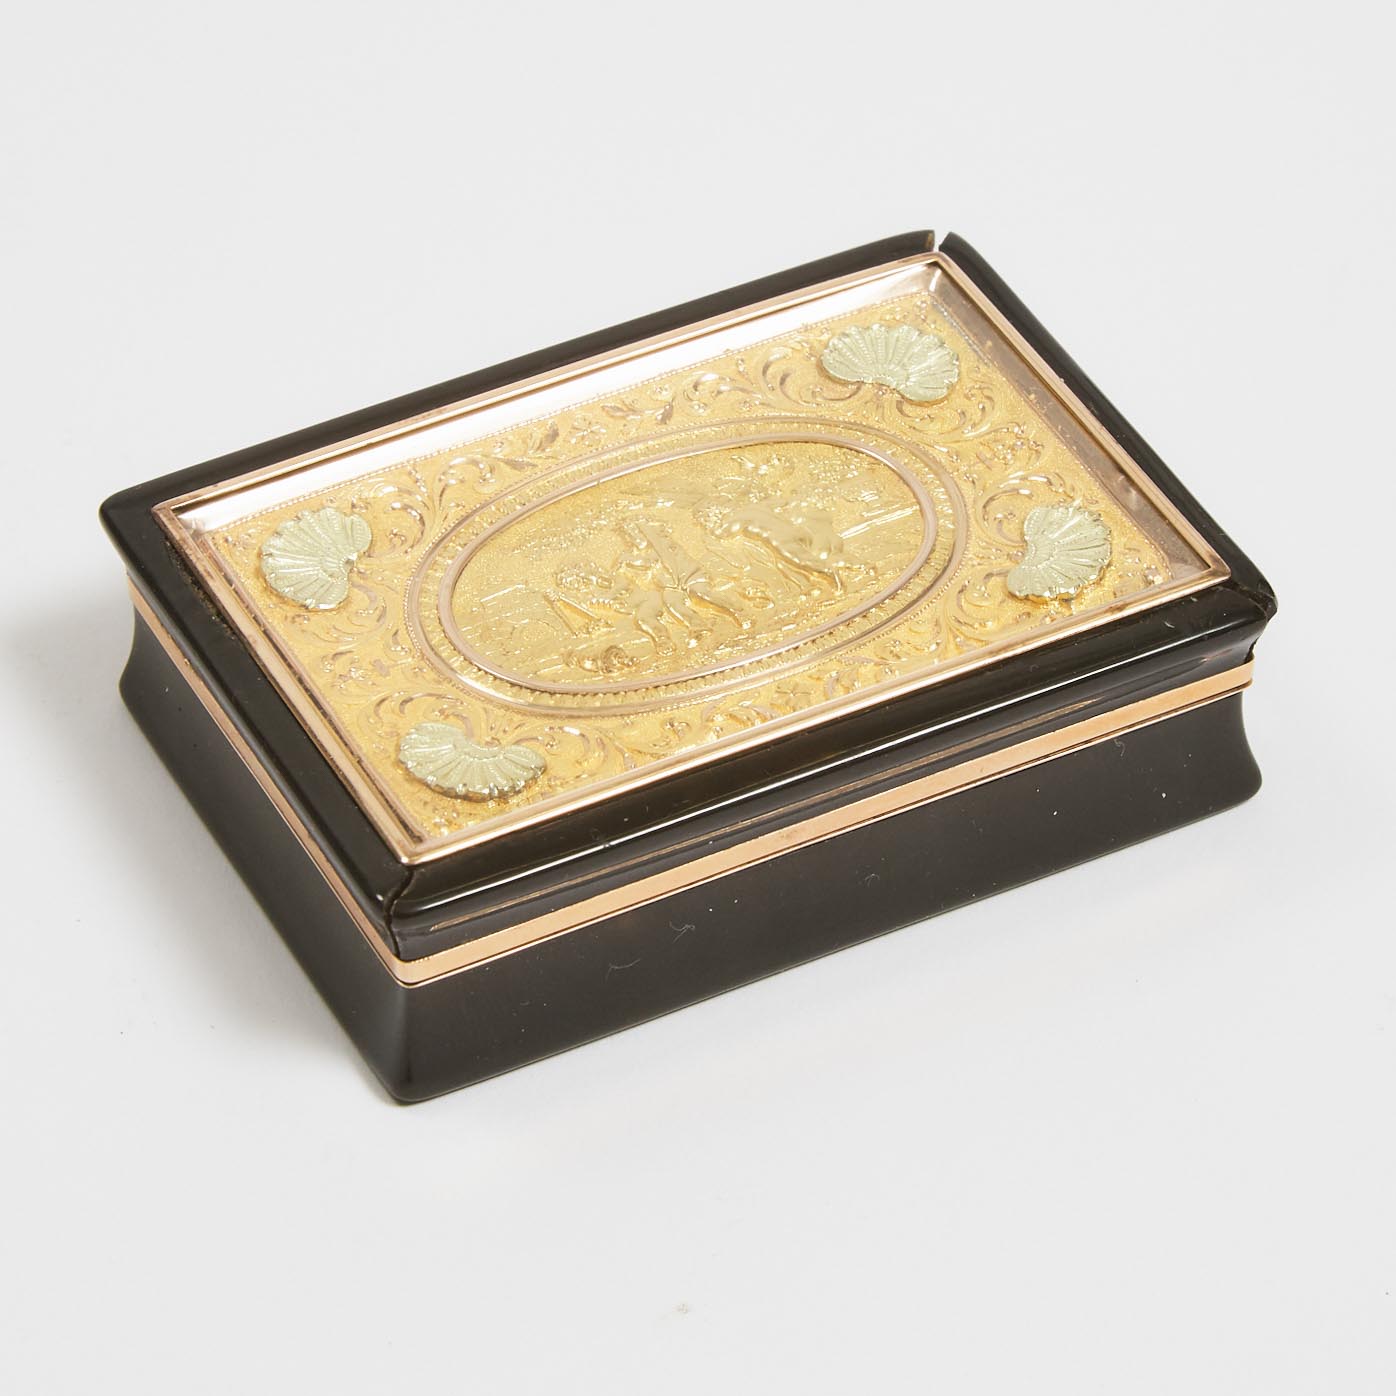 Princess Frederica Charlotte of Prussia Regncy Gold Mounted Tortoiseshell Presentation Snuff Box to Charles Dumergue, c.1815